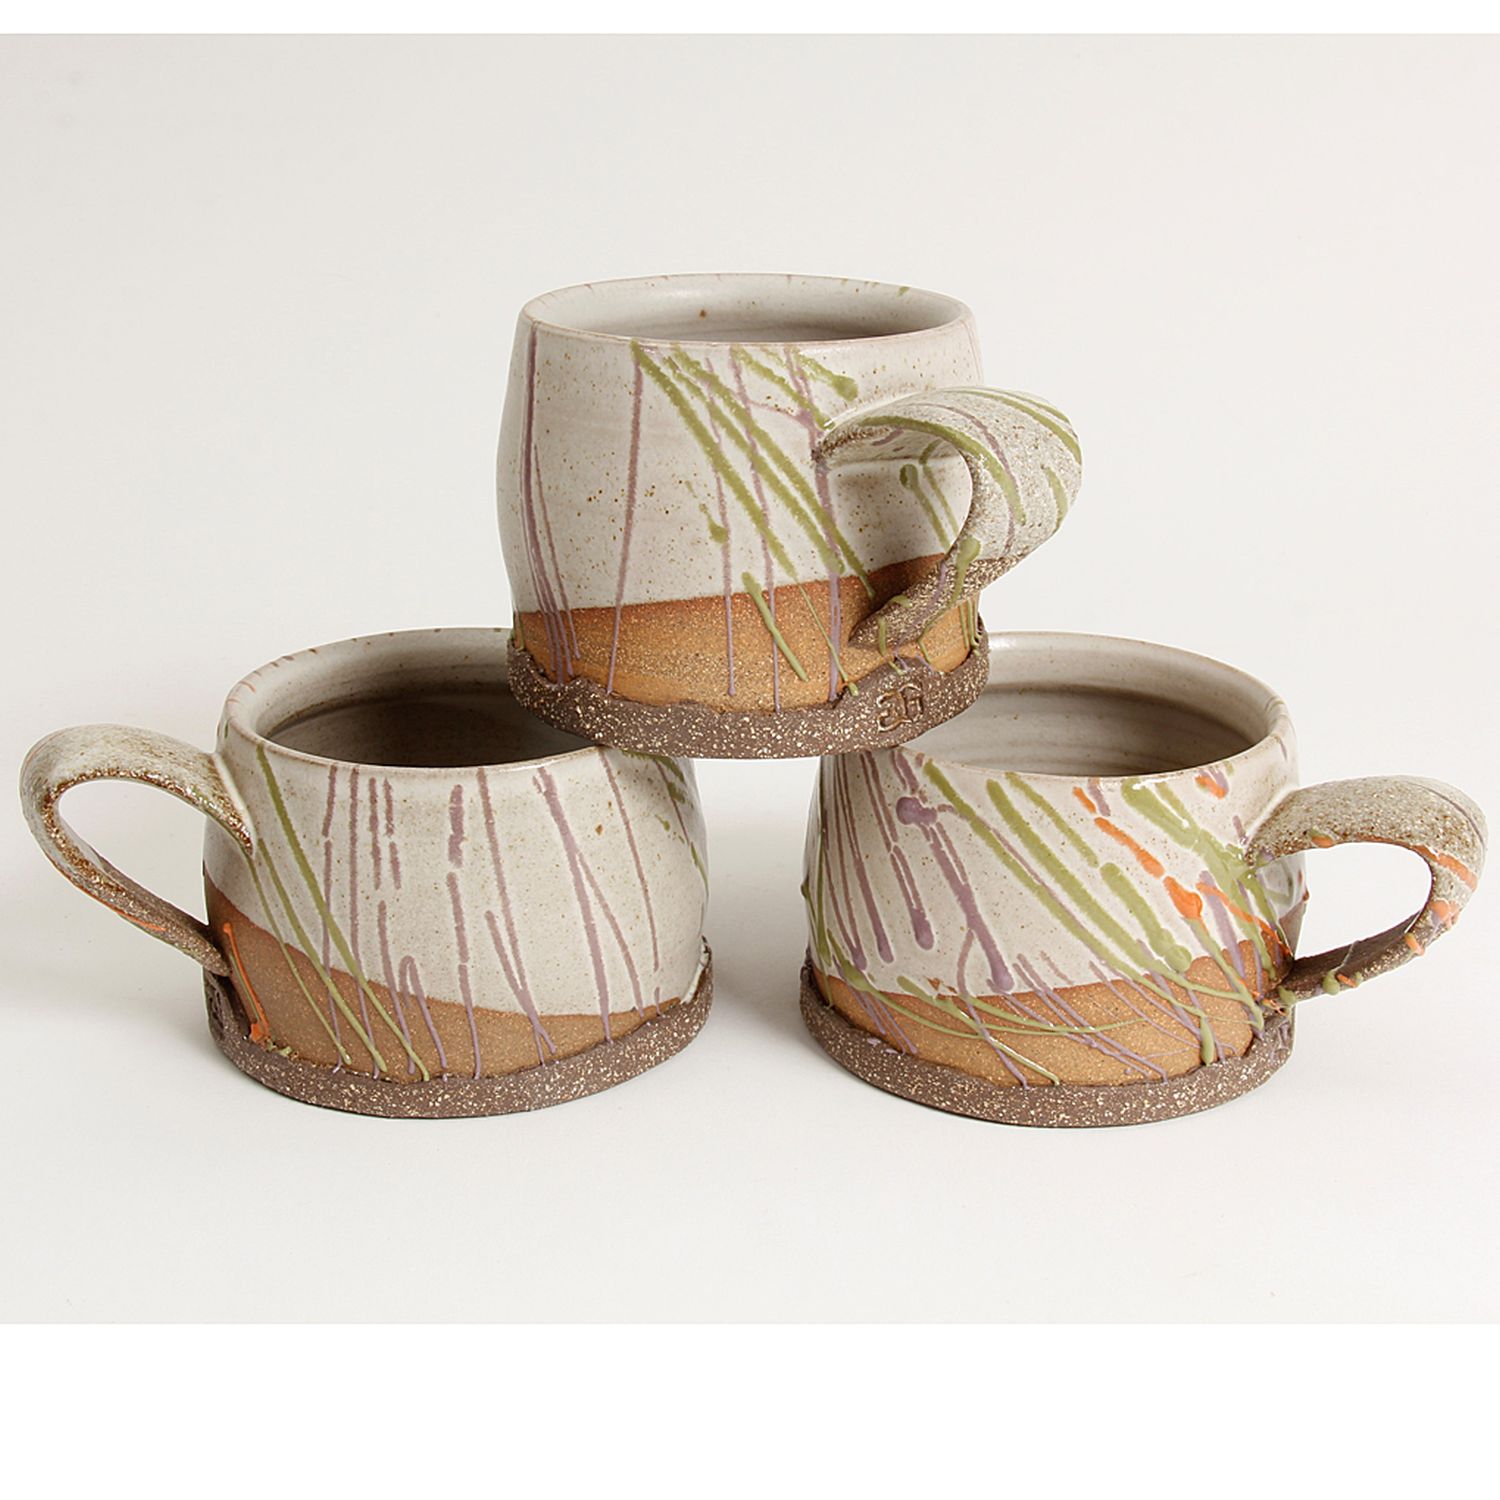 Gracia Isabel Gomez: “Tealicious” Brown Chocolate Mug with Colours Product Image 4 of 6